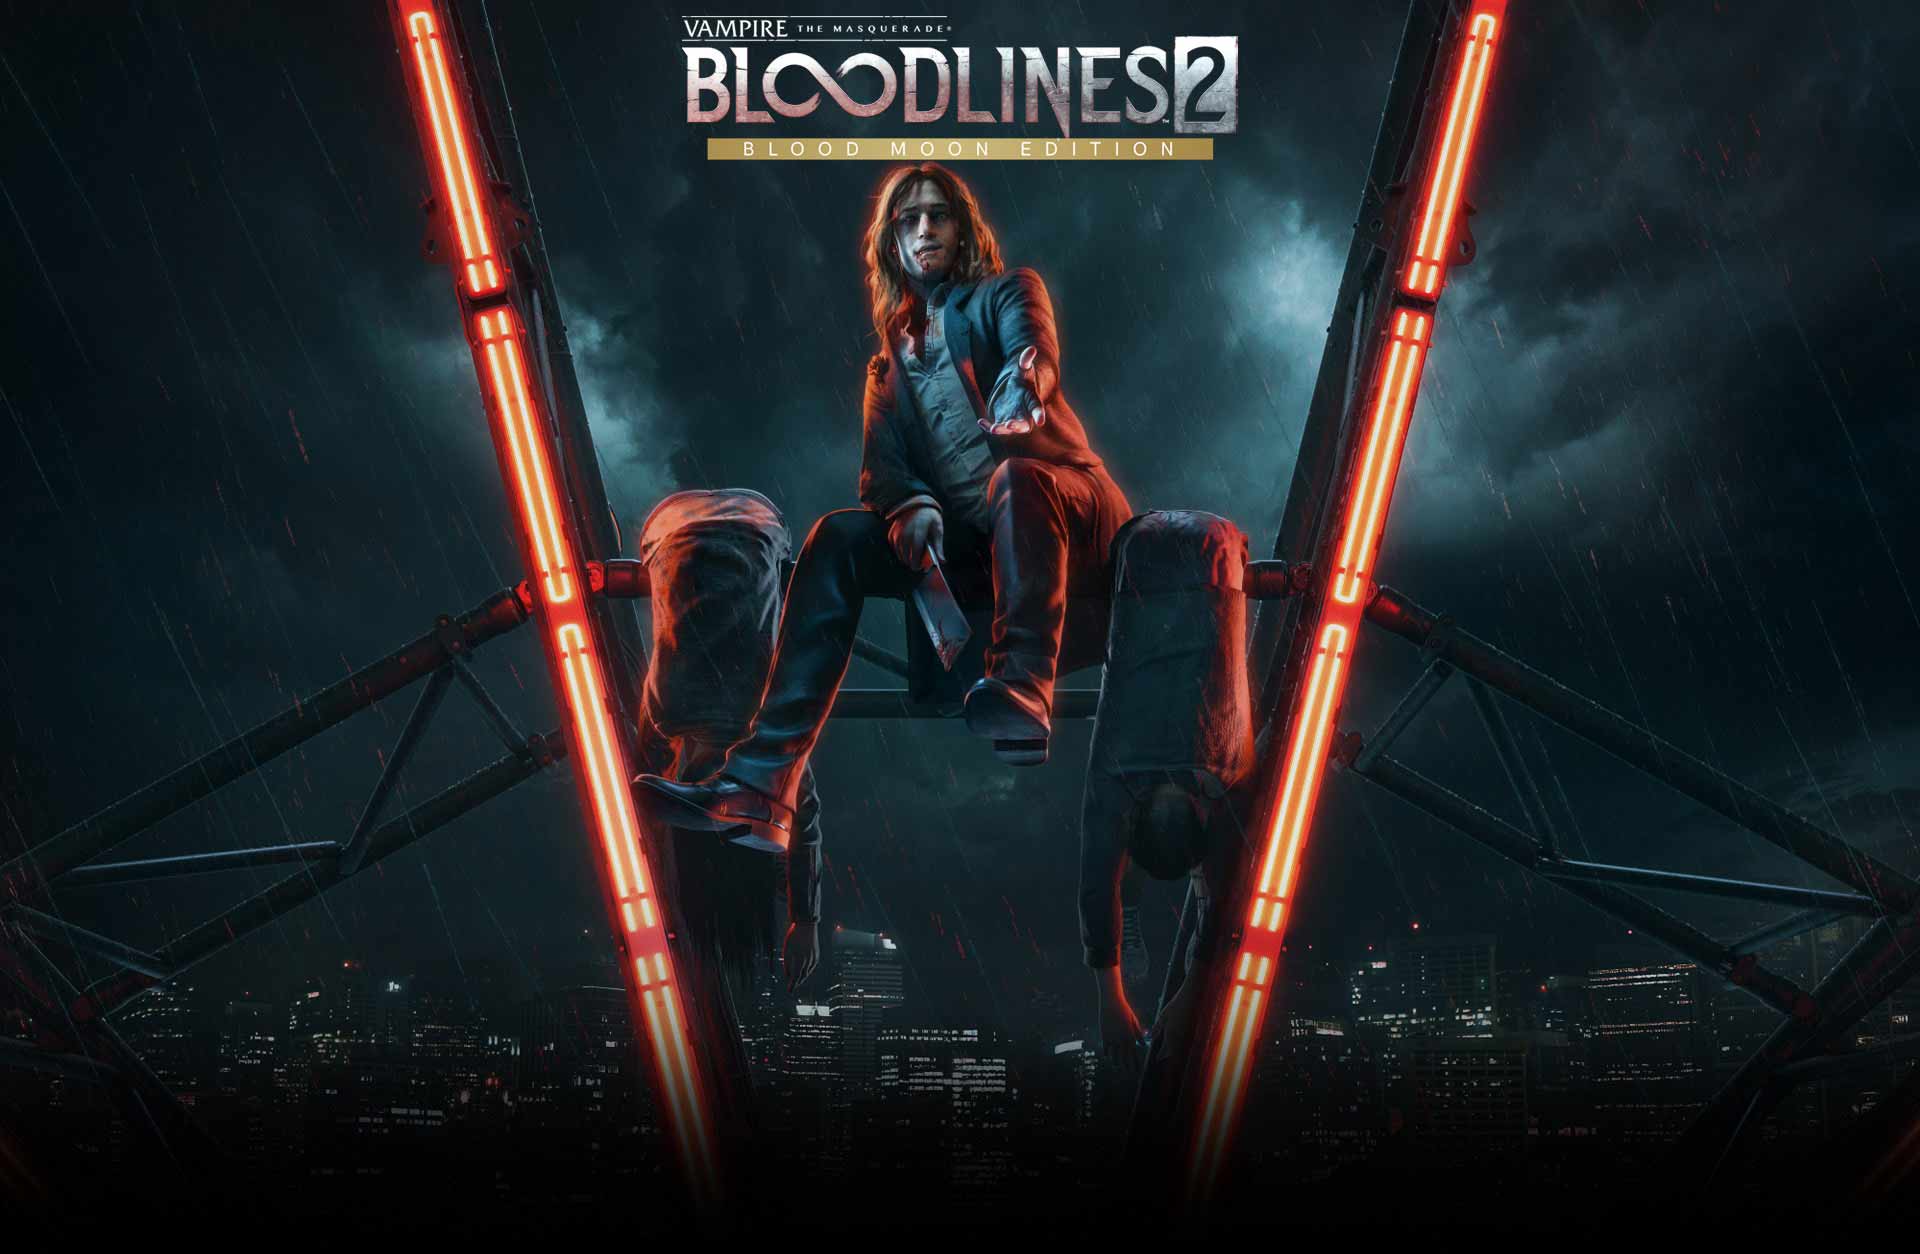 Vampire The Masquerade - Bloodlines 2 Blood Moon Edition